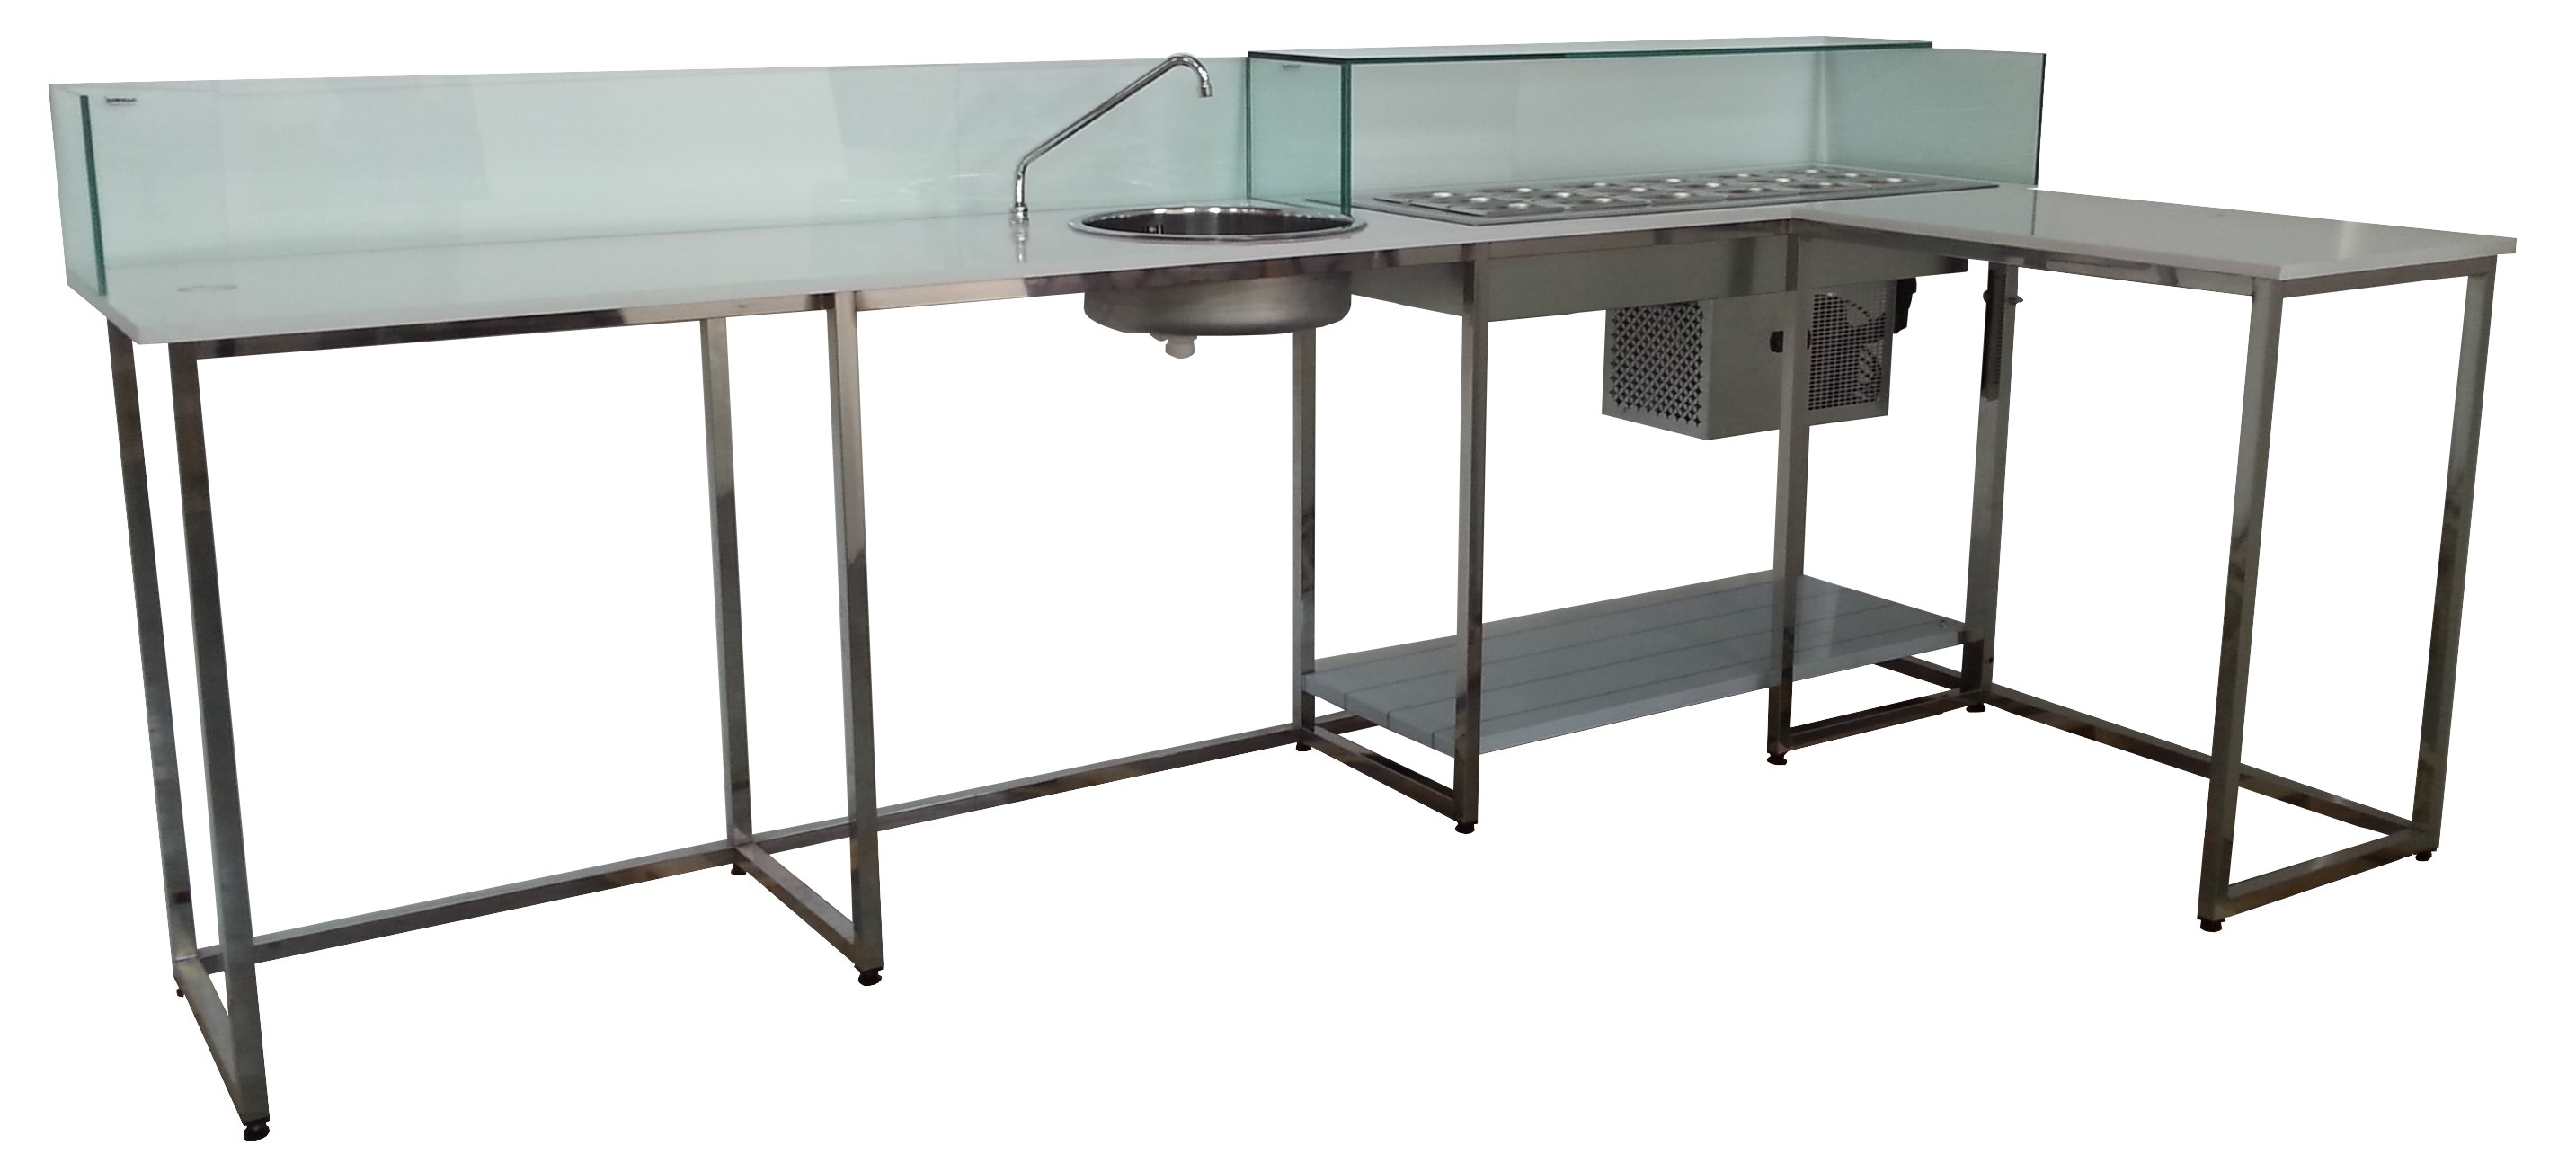 Stainless Bar Counter